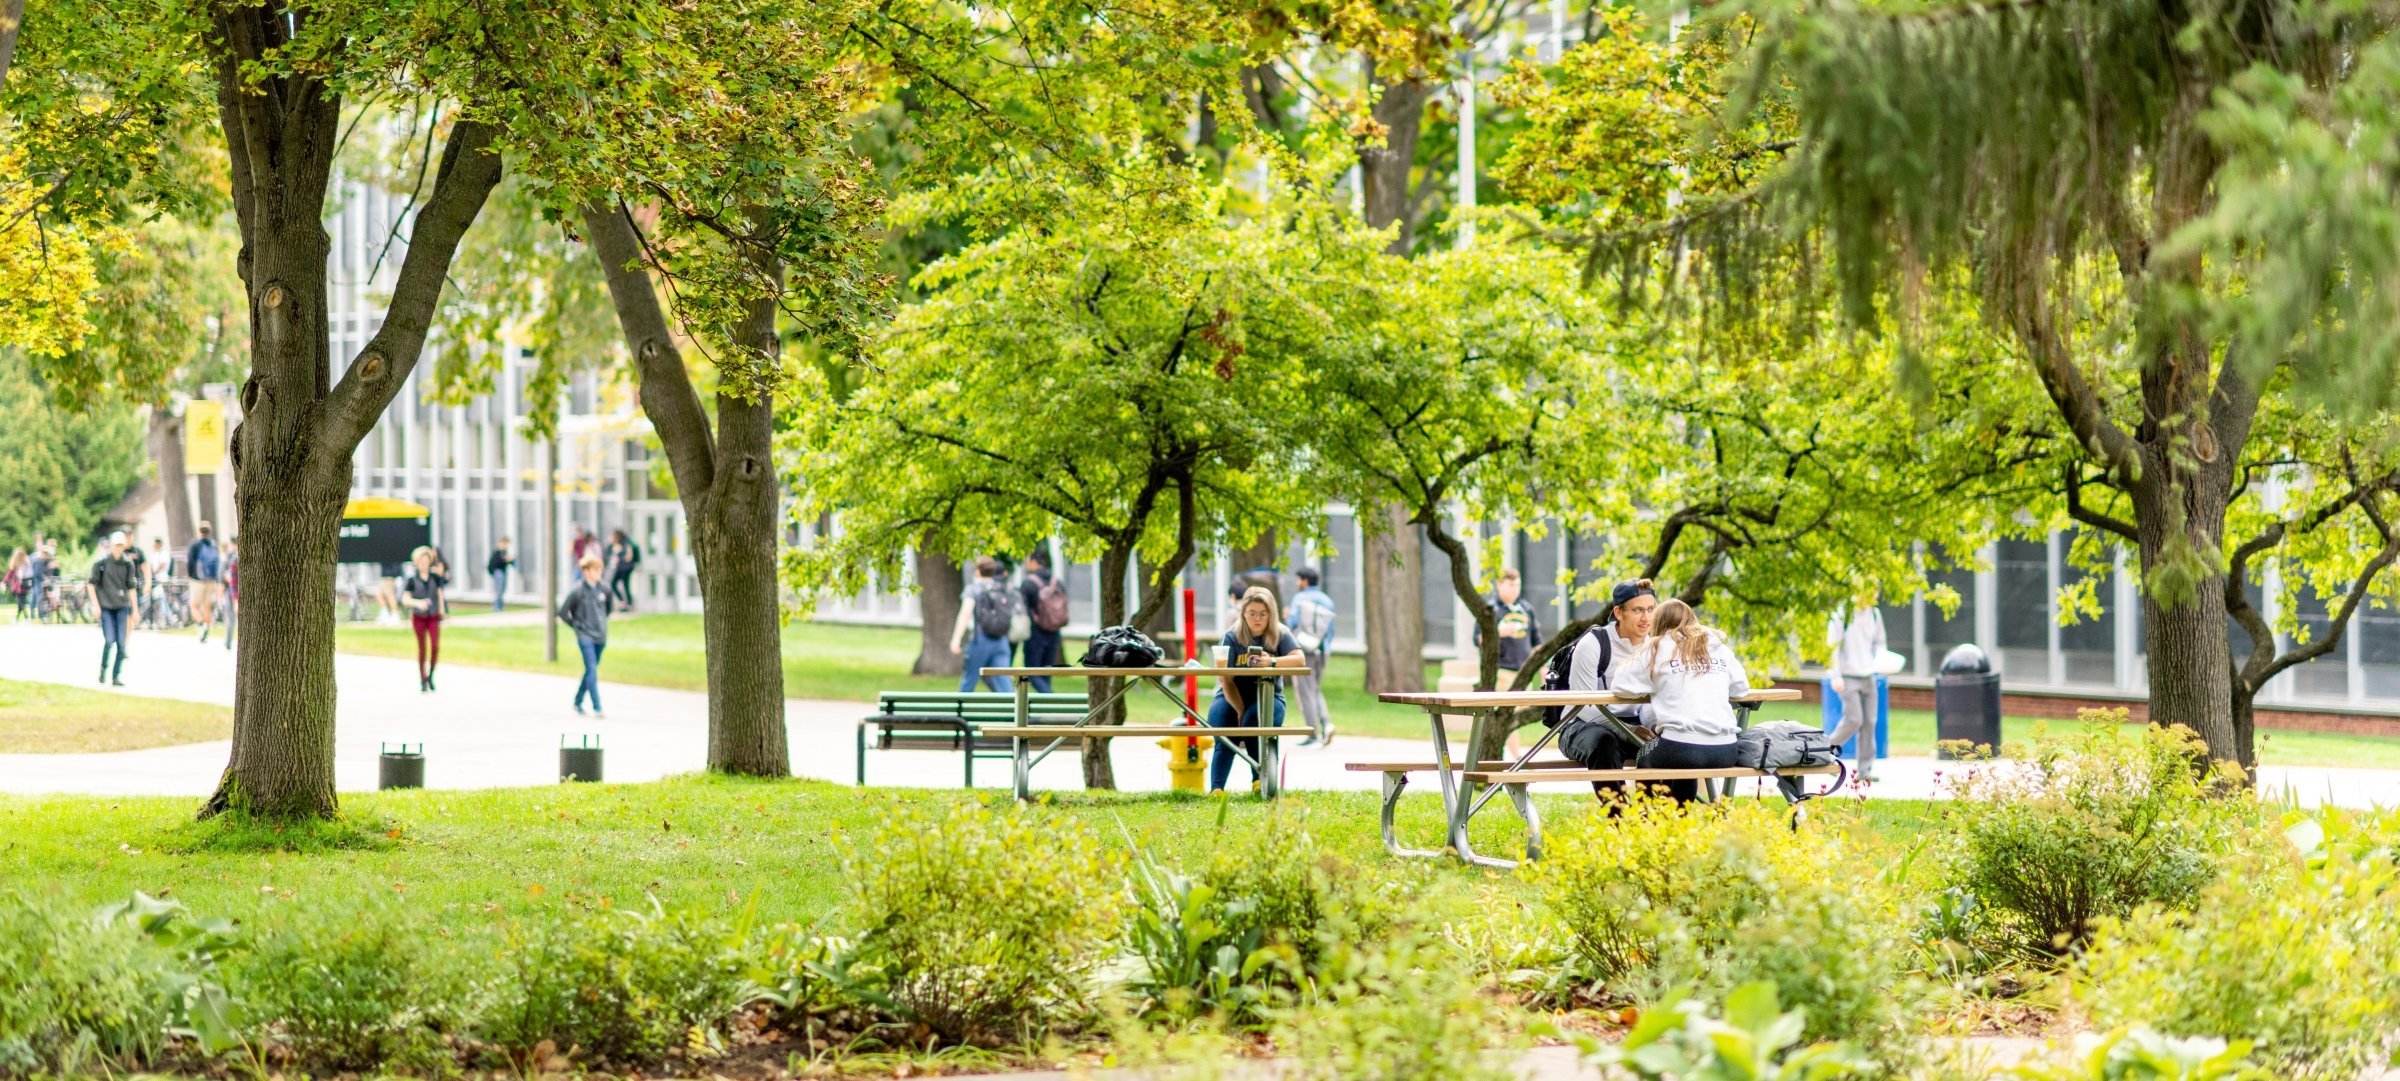 Students studying at a table under trees.